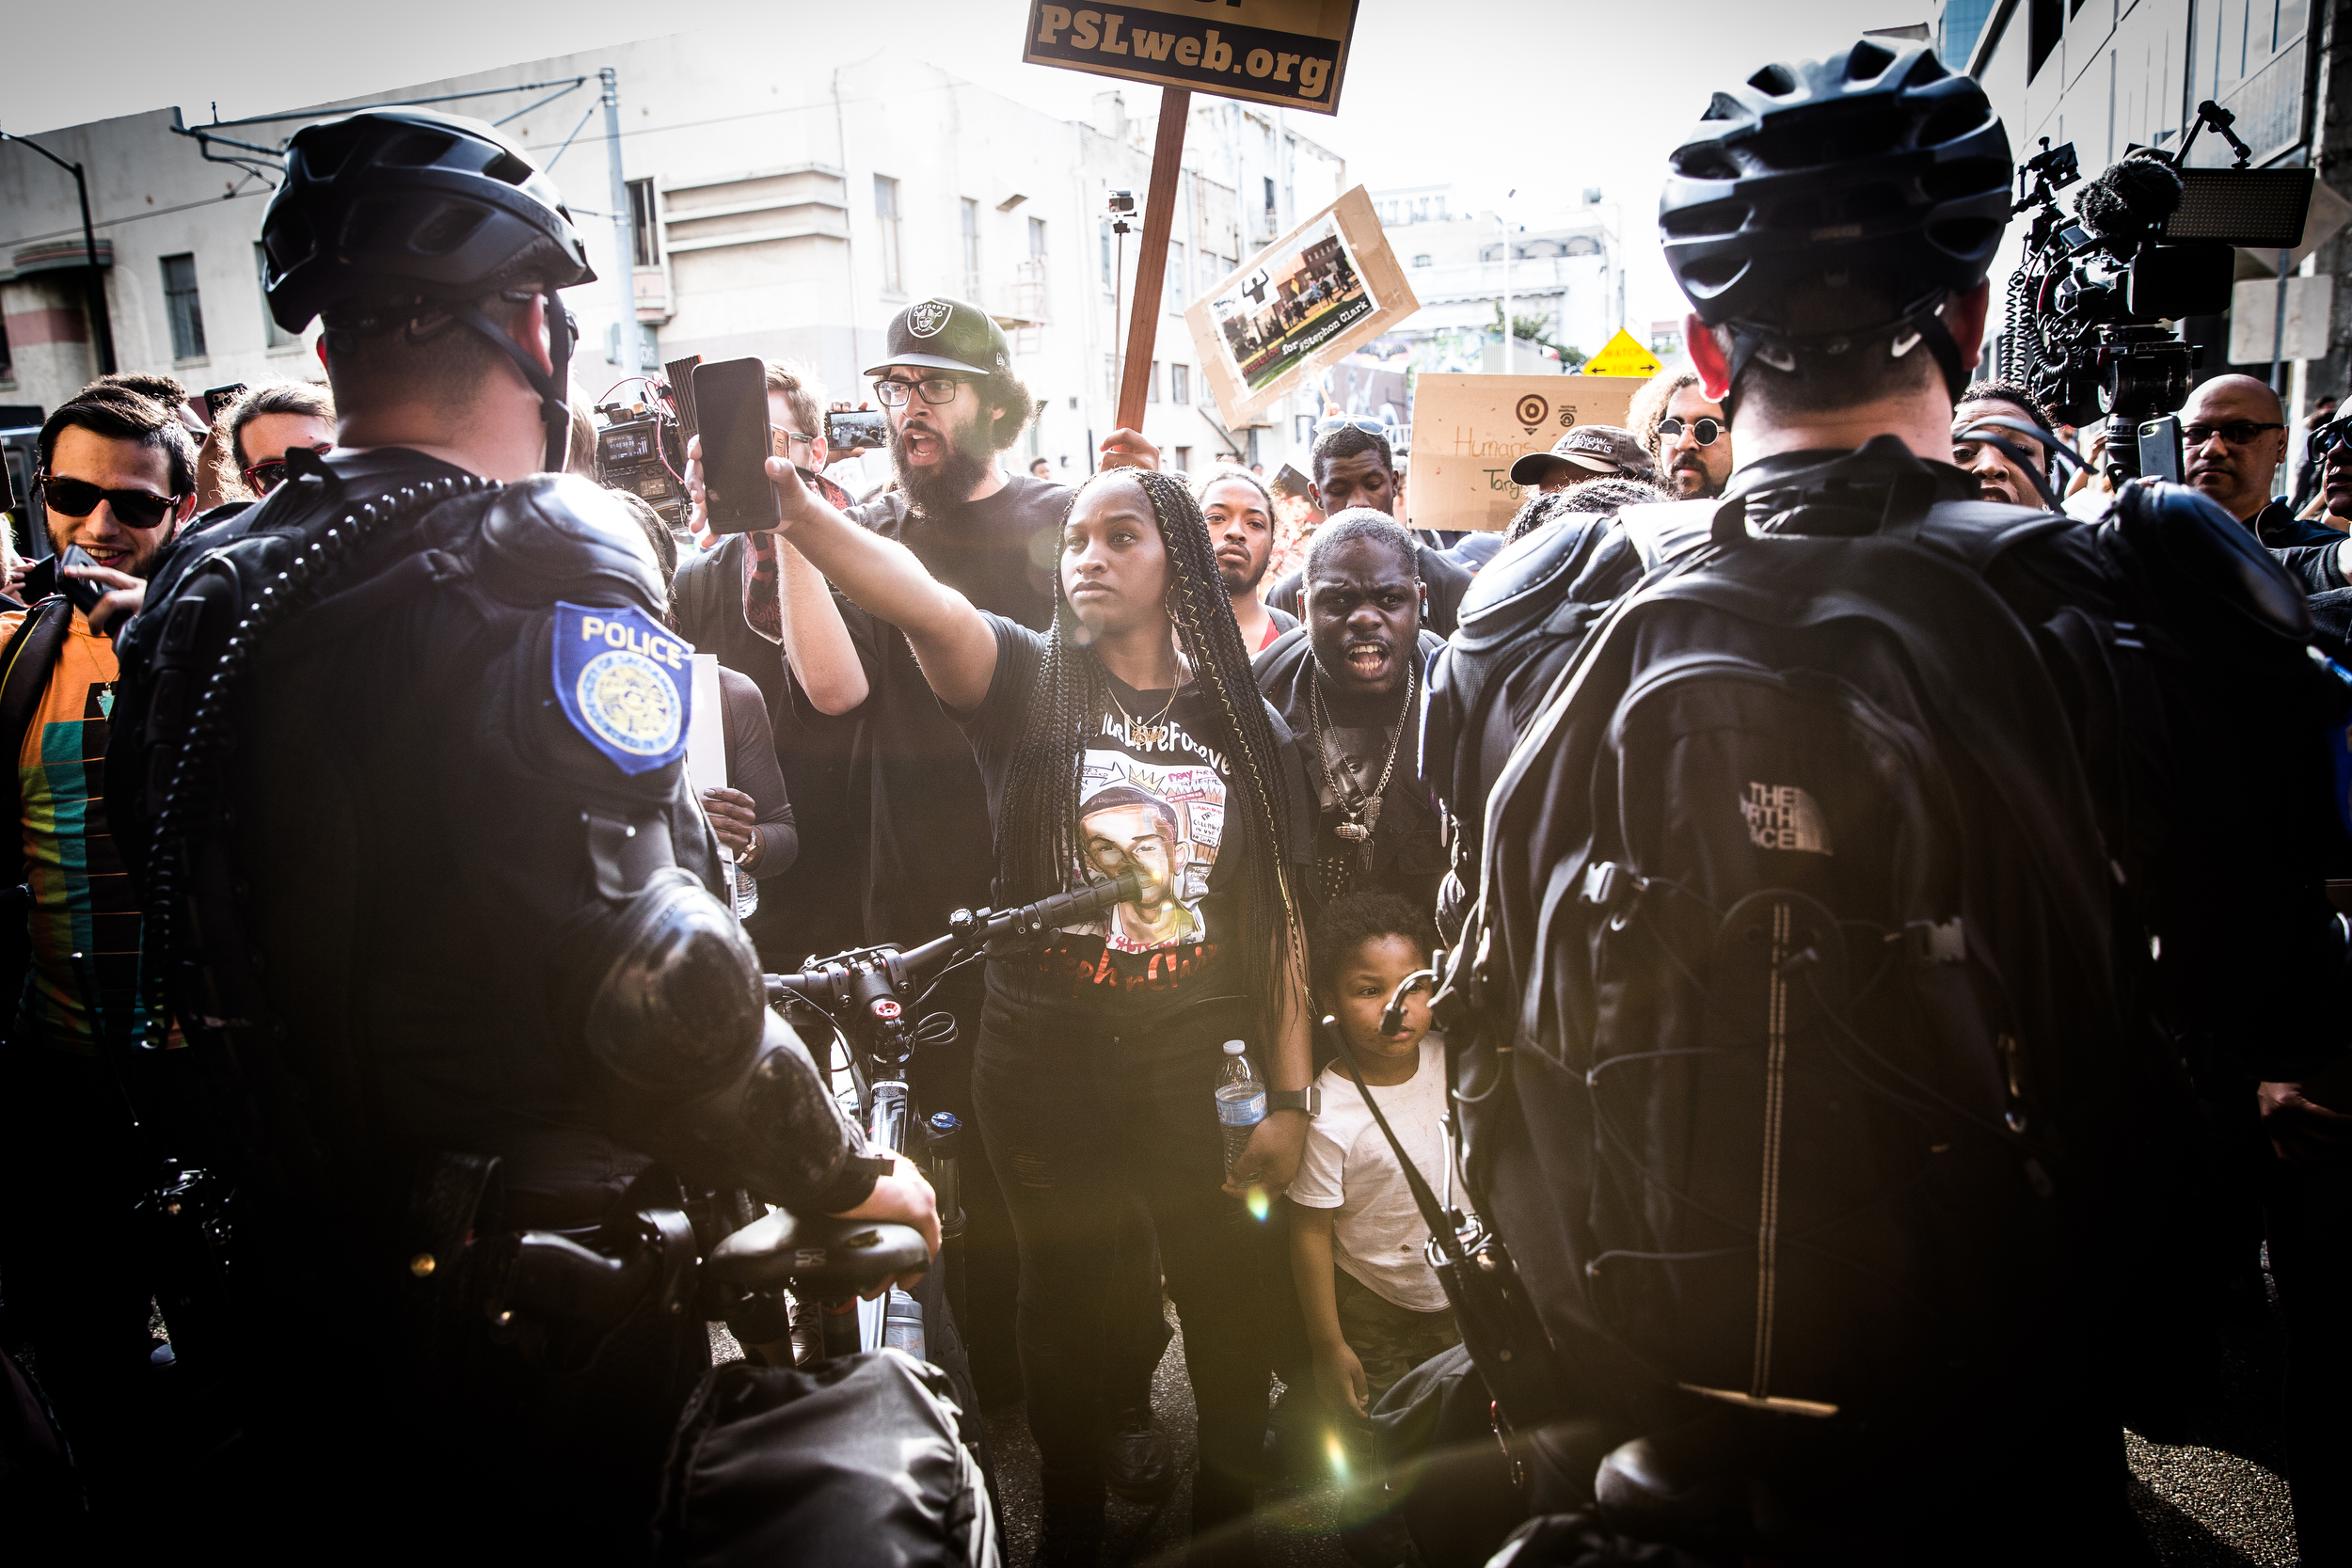  Black Lives Matter protestors confront police in downtown Sacramento on March 29, 2018. Stephon Clark was shot and killed by two Sacramento police officers in his grandmother’s backyard while they investigated a vandalism complaint. Since his death,